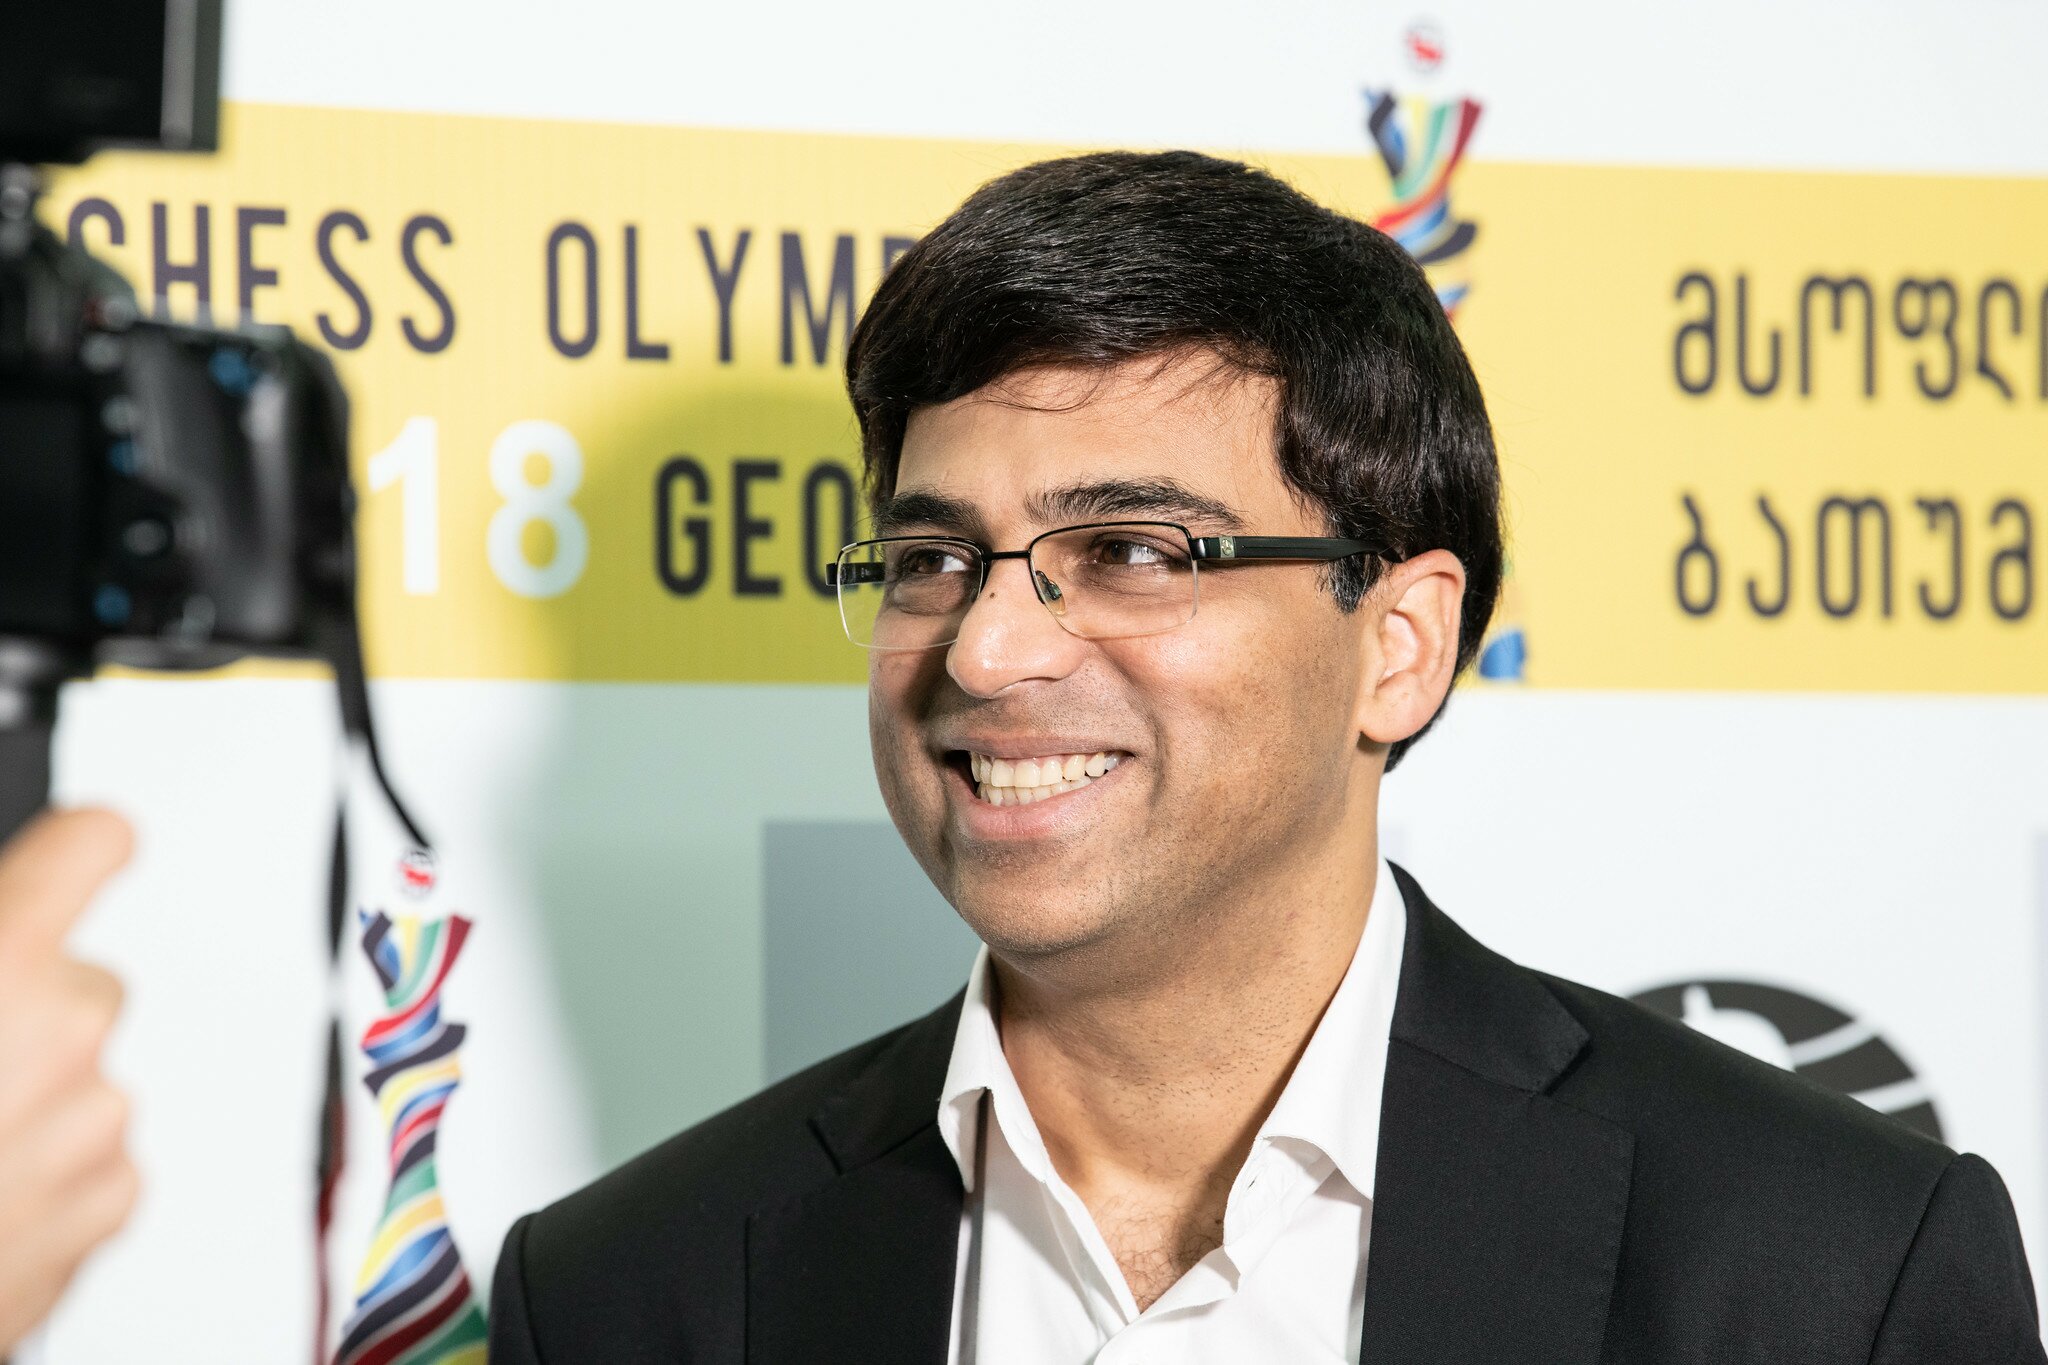 FIDE World Cup: Carlsen Plays, Anand Star Commentator In